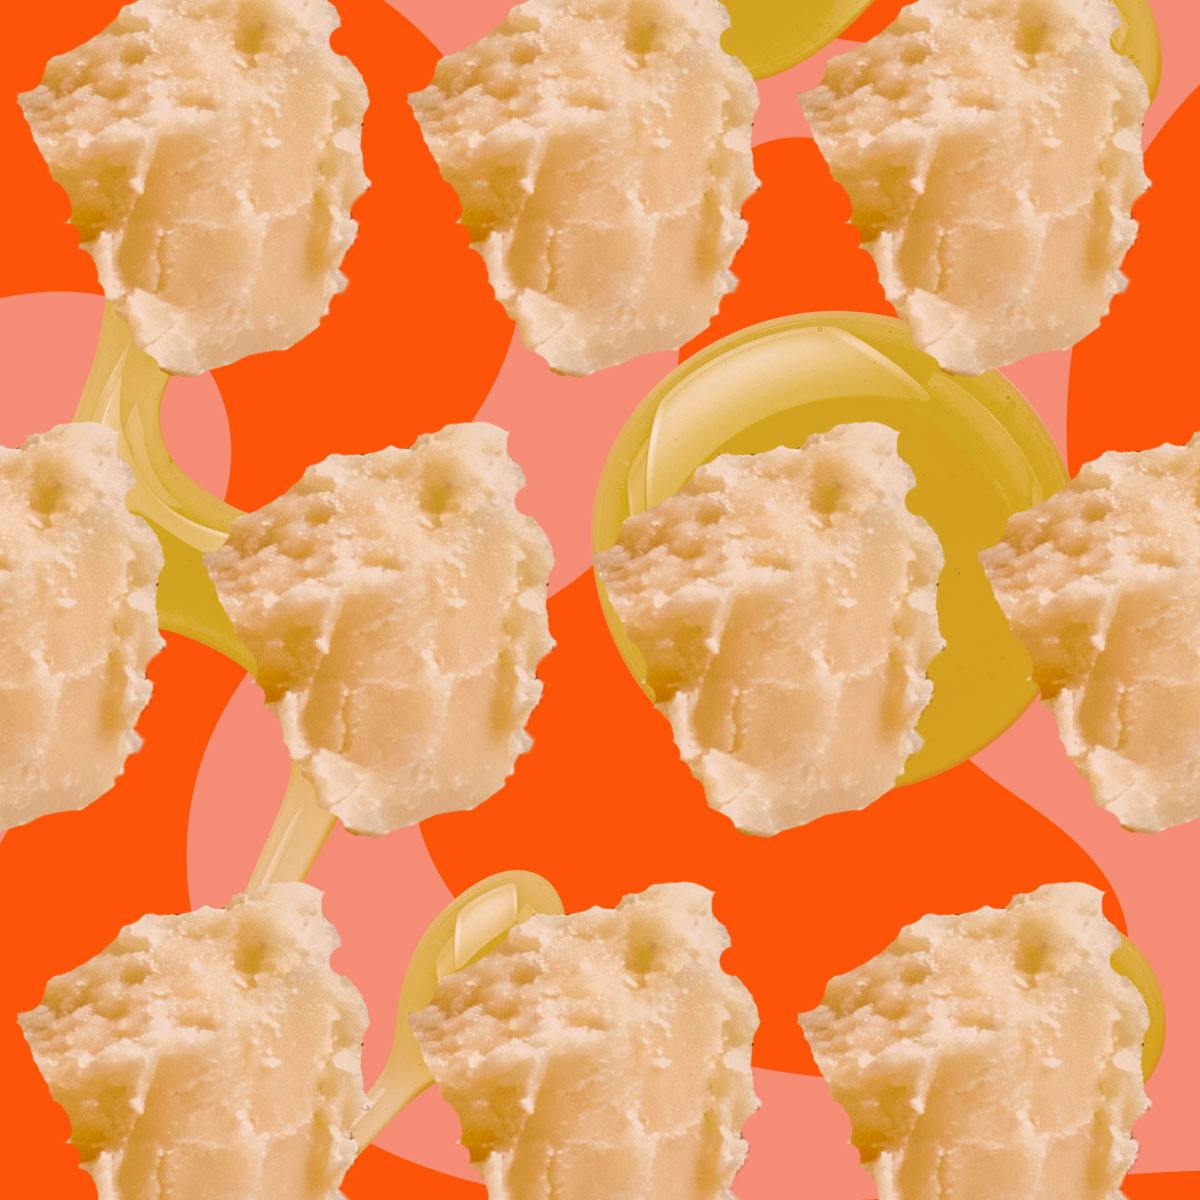 Image shows cut-out images of ingredients tiled over an orange background